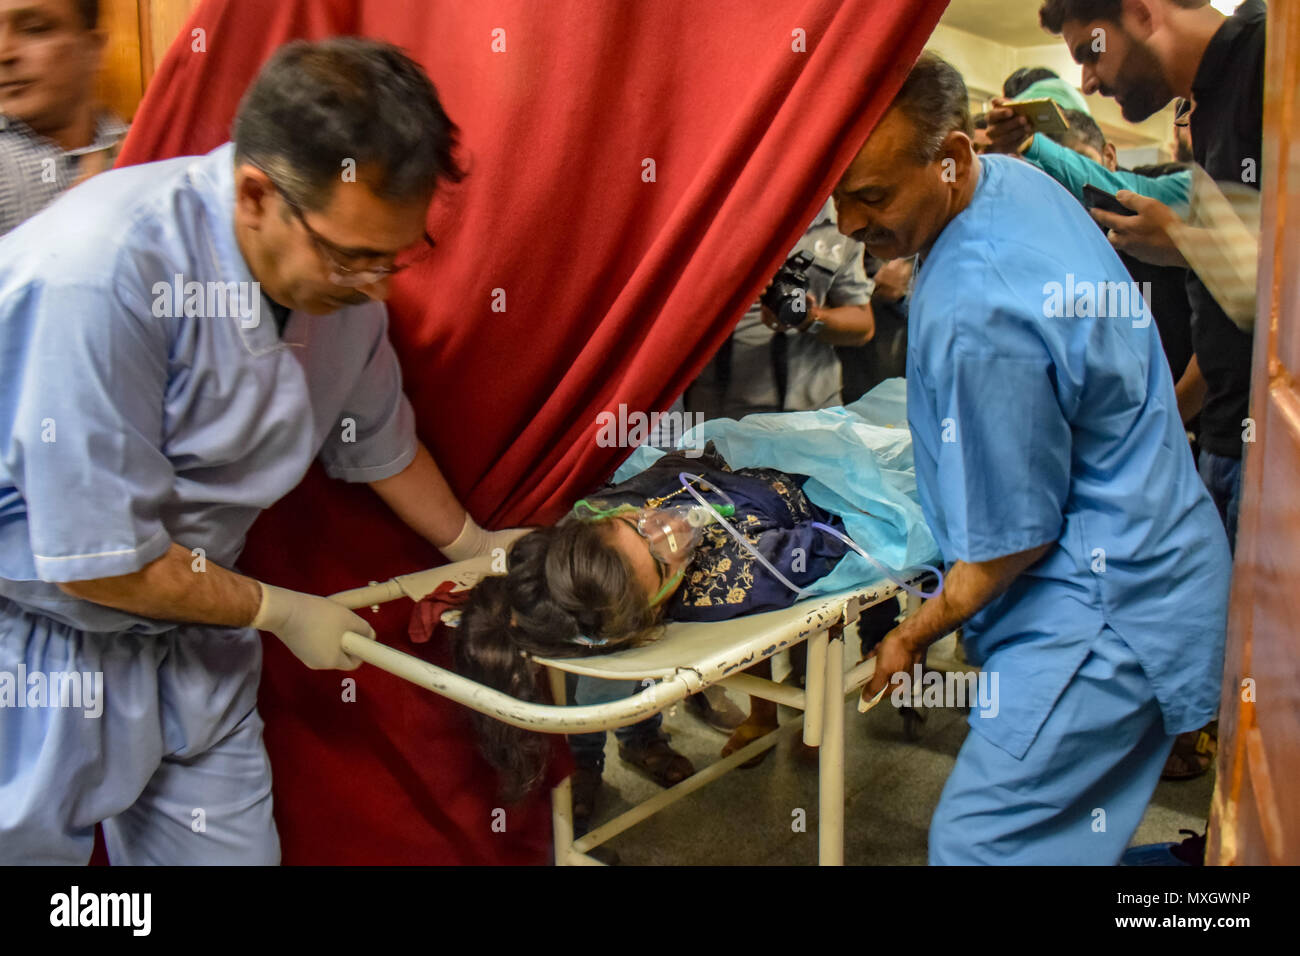 June 4, 2018 - Srinagar, Jammu & Kashmir, India - (EDITORS NOTE: Image contains graphic content) Kashmiris carry 13-year-old Nadia, who was injured in an explosion, on a stretcher for treatment at a local hospital in Srinagar, Indian Kashmir on Monday. A grenade exploded on a busy road in the southern town of Shopian in Indian-controlled Kashmir wounding at least 12 civilians and four policemen on Monday, police said. Credit: Abbas Idrees/SOPA Images/ZUMA Wire/Alamy Live News Stock Photo